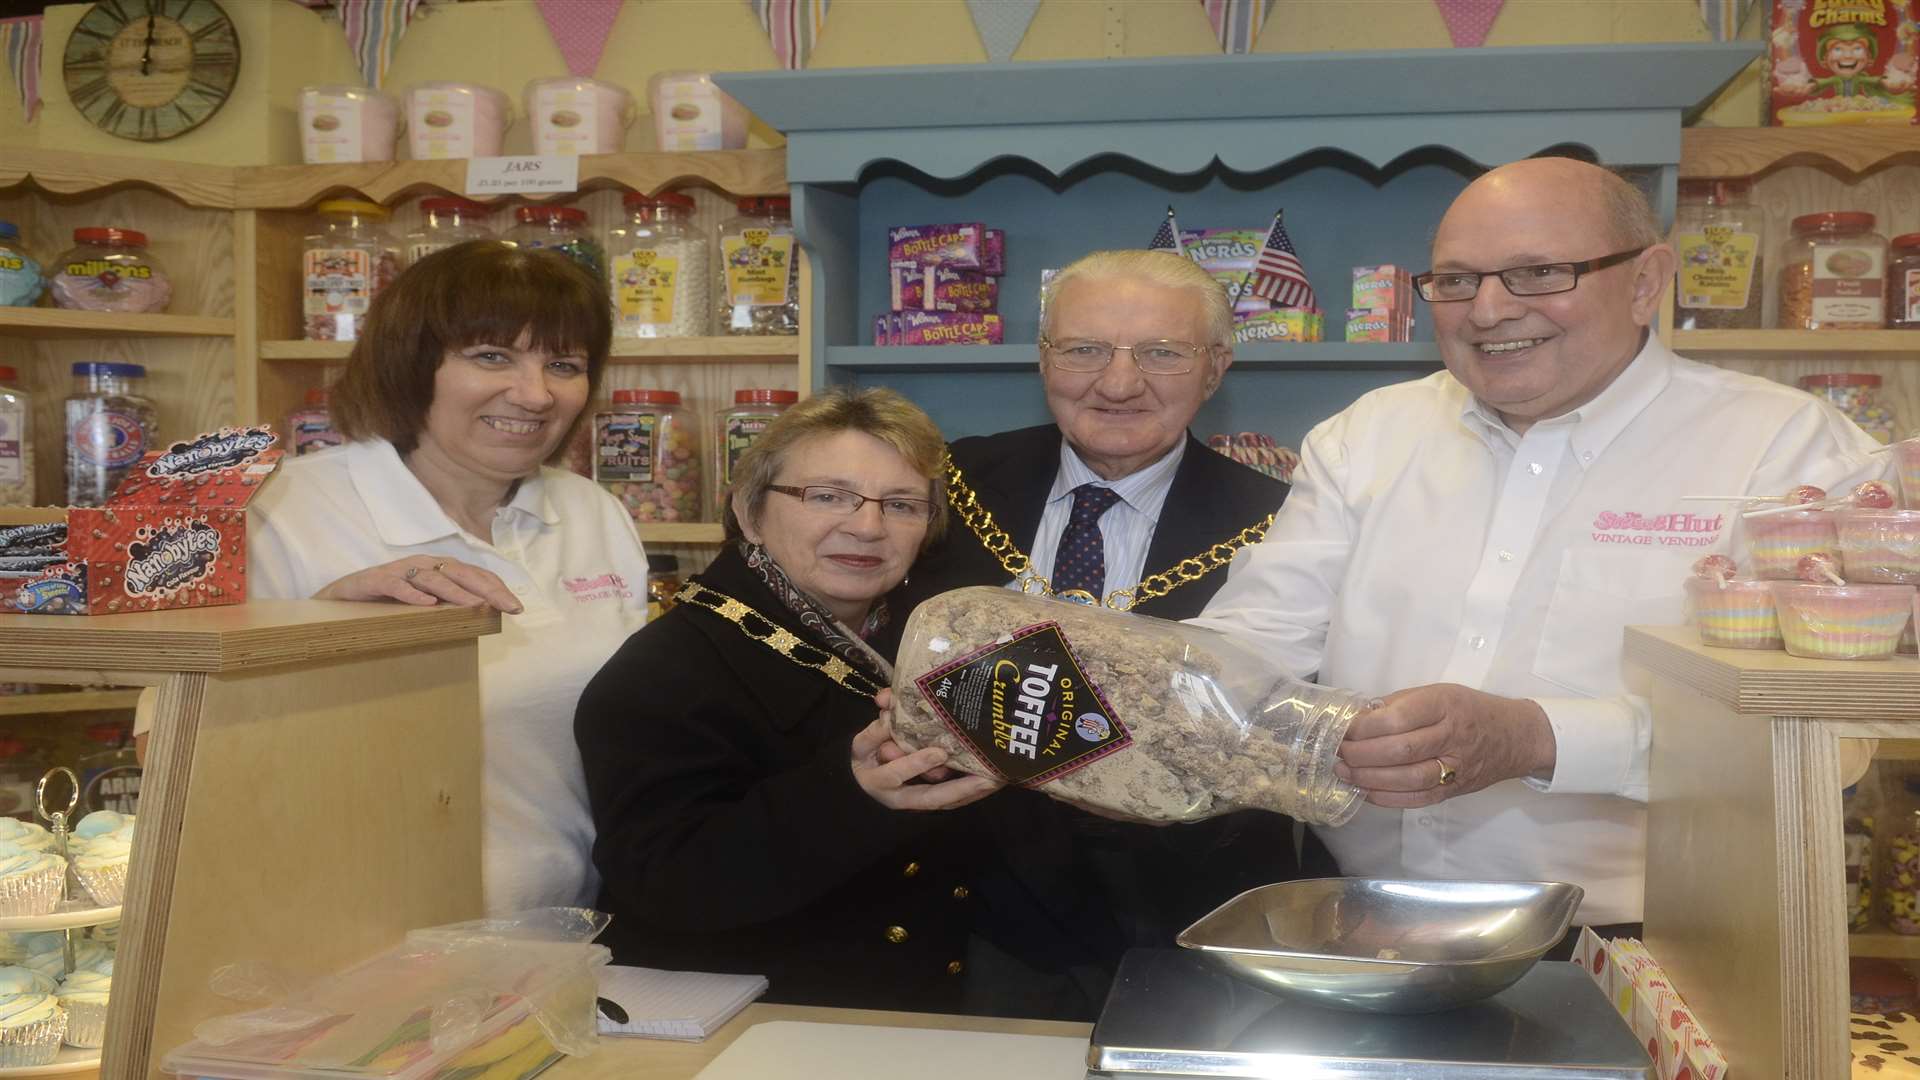 Nina and Richard Weeks with Lady Mayoress Brenda Bobbin and Mayor Cllr George Bobbin at the opening of The Sweet Hut on The Leas, Minster